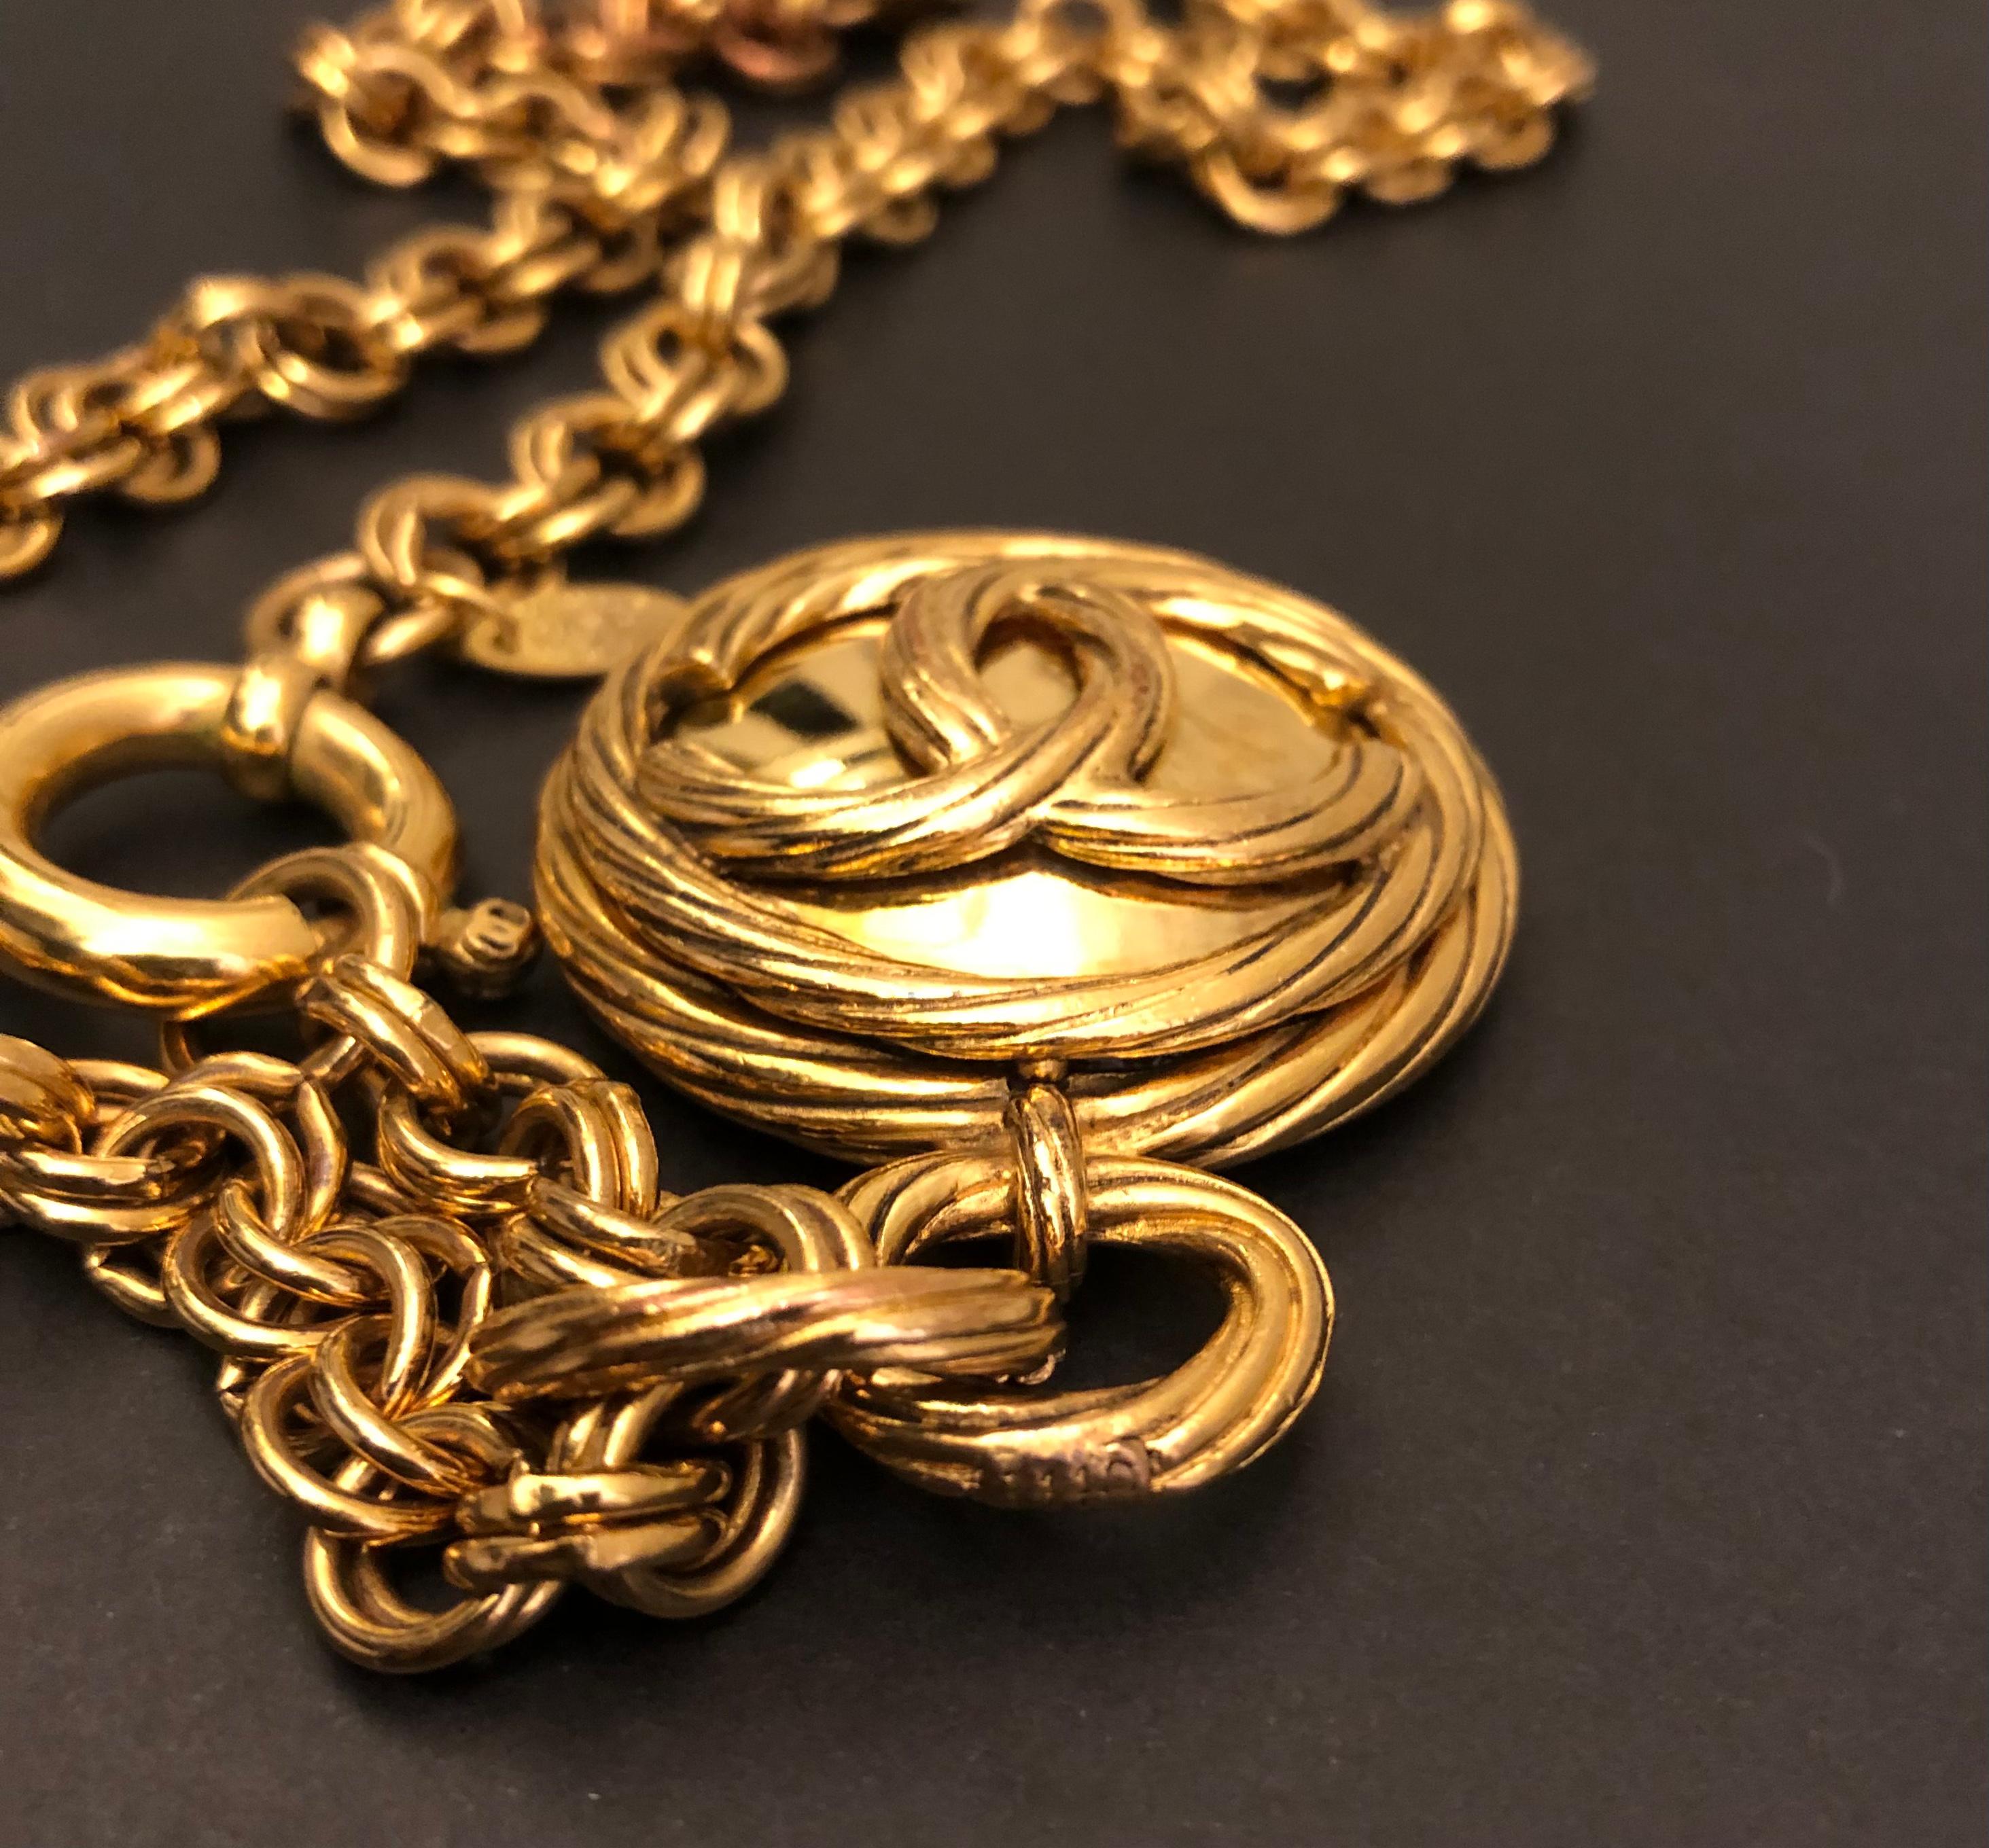 1993 Vintage CHANEL Gold Toned Chain Mirror Necklace For Sale 1